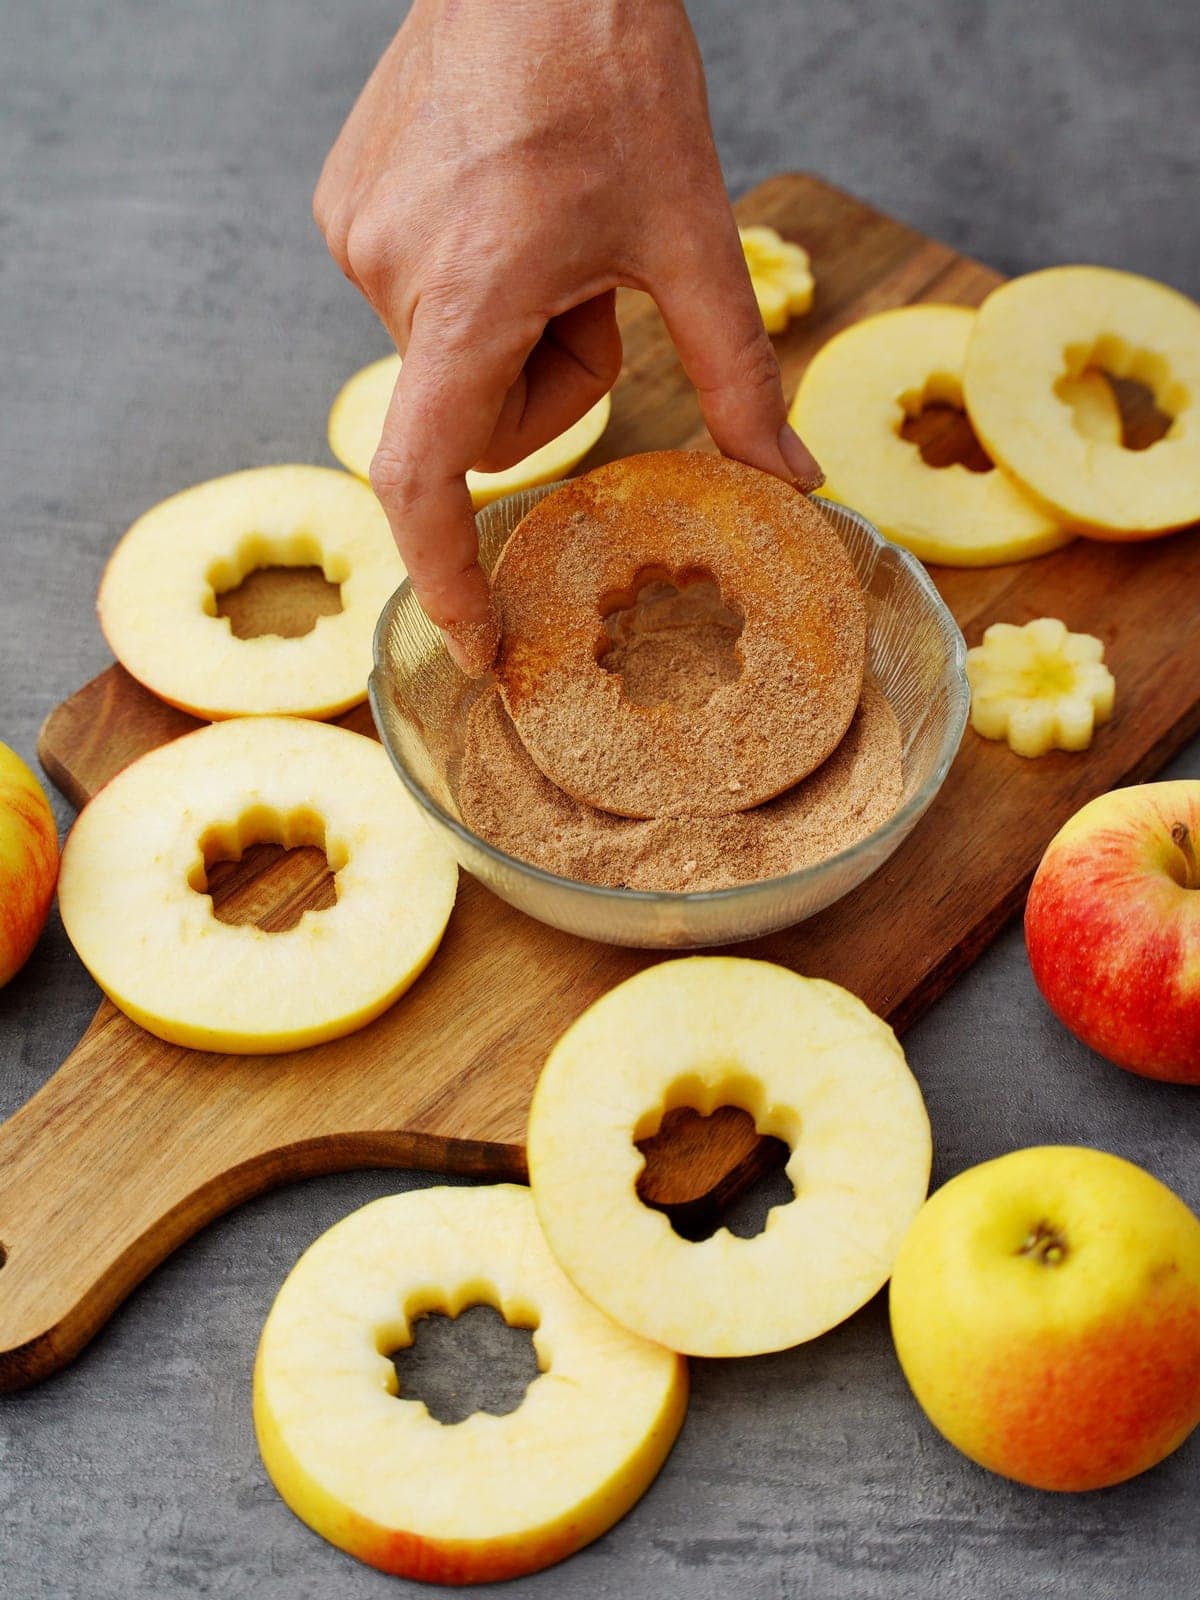 dipping cored apple slices into bowl with cinnamon sugar